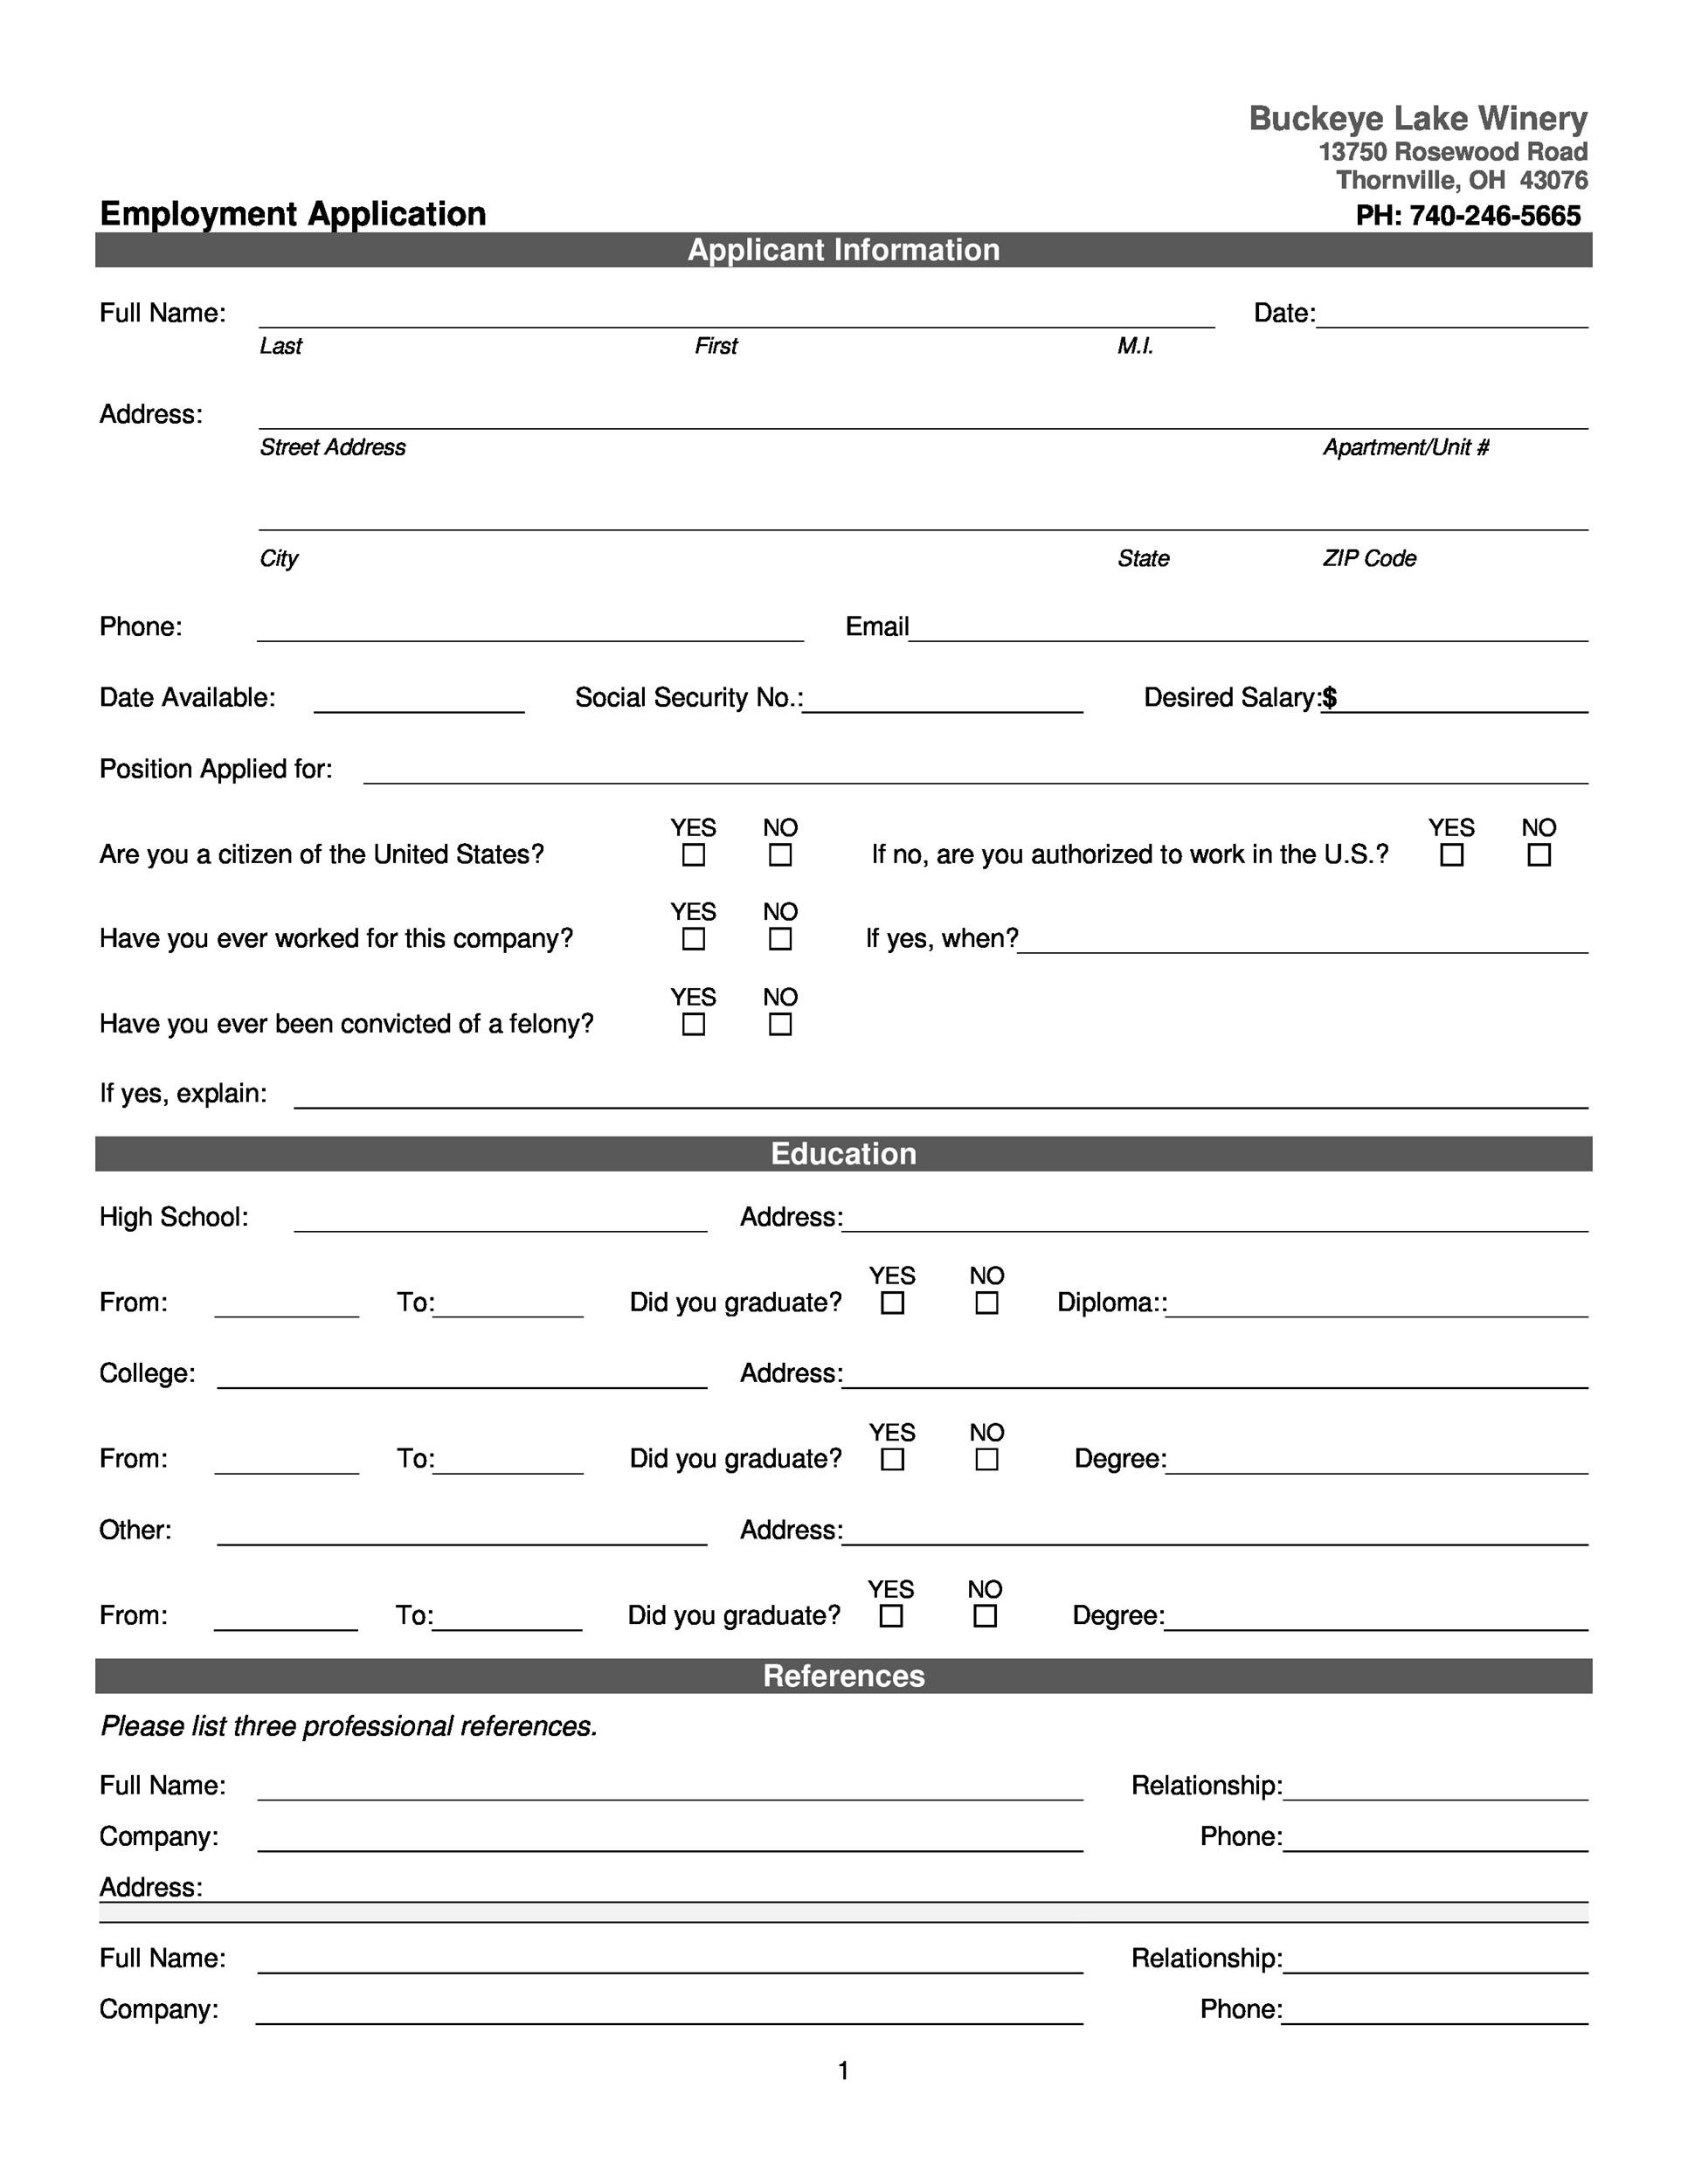 rue-21-printable-application-form-printable-forms-free-online